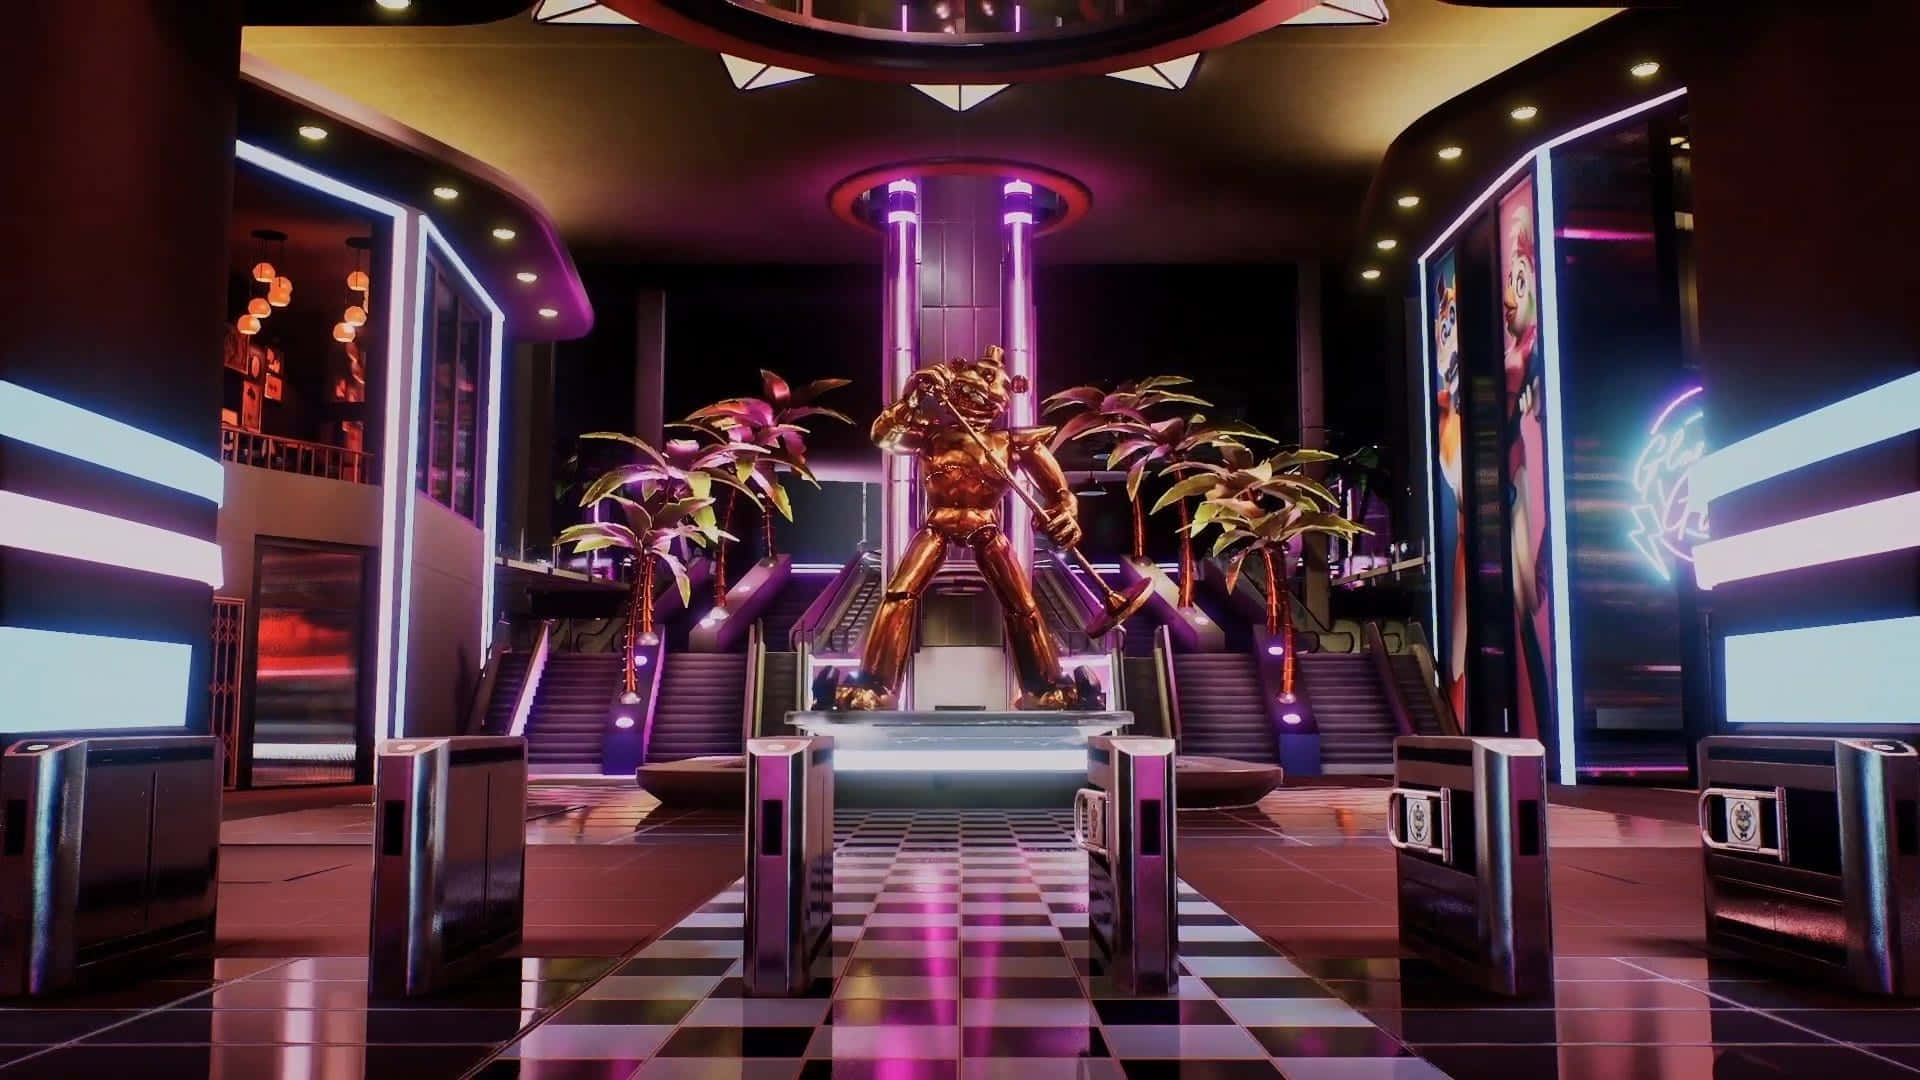 A Futuristic Lobby With Neon Lights And A Statue